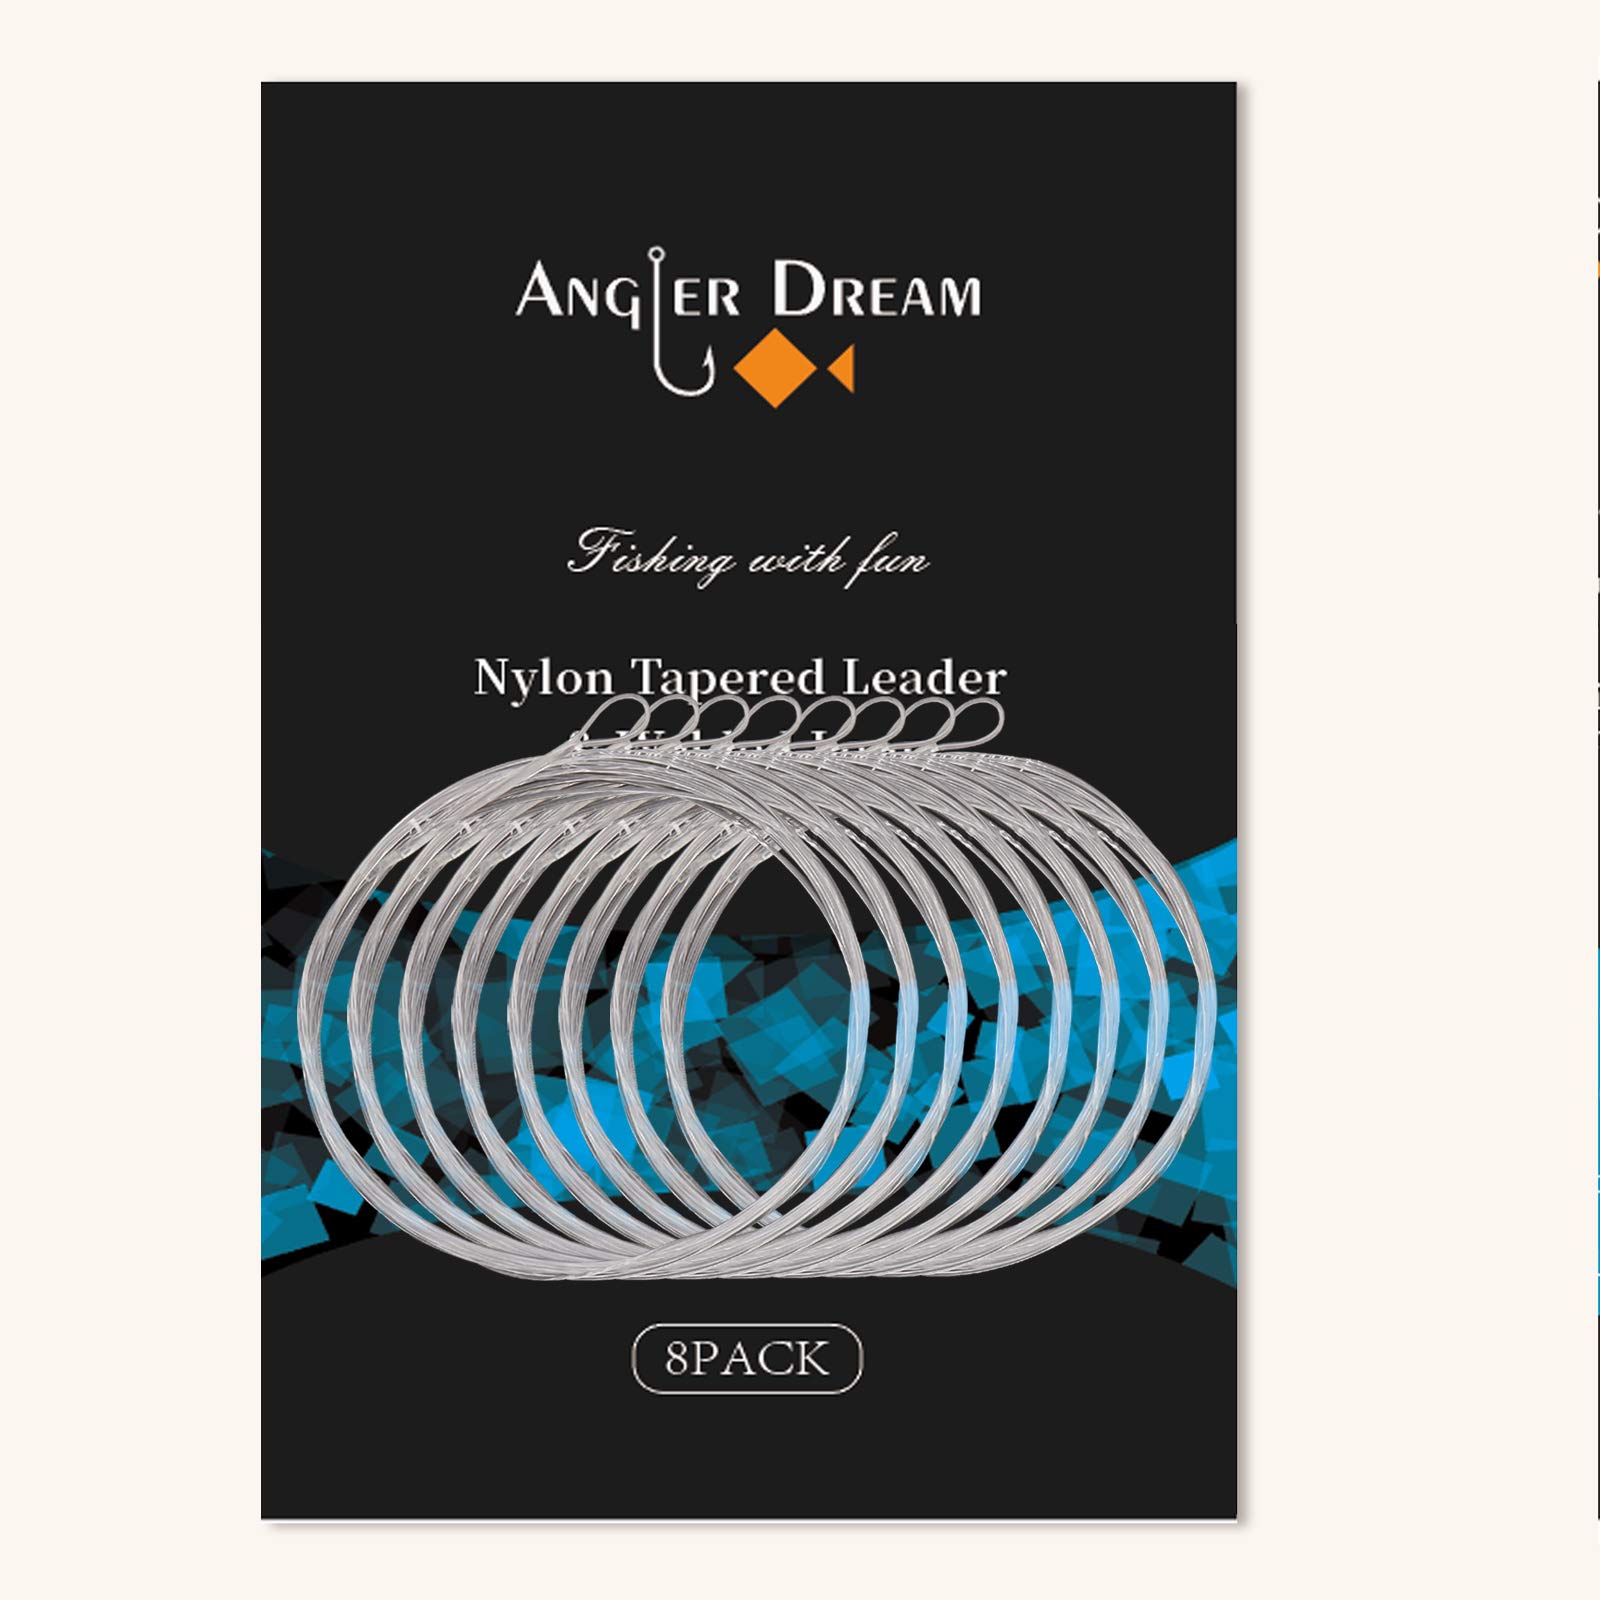 ANGLER DREAM 8 Pack Welded Tapered Leader Fly Fishing Leader with Loop 9ft  0/1/2/3/4/5/6/7X Nylon Fly Leader Welded Loop Fly Leader 4x